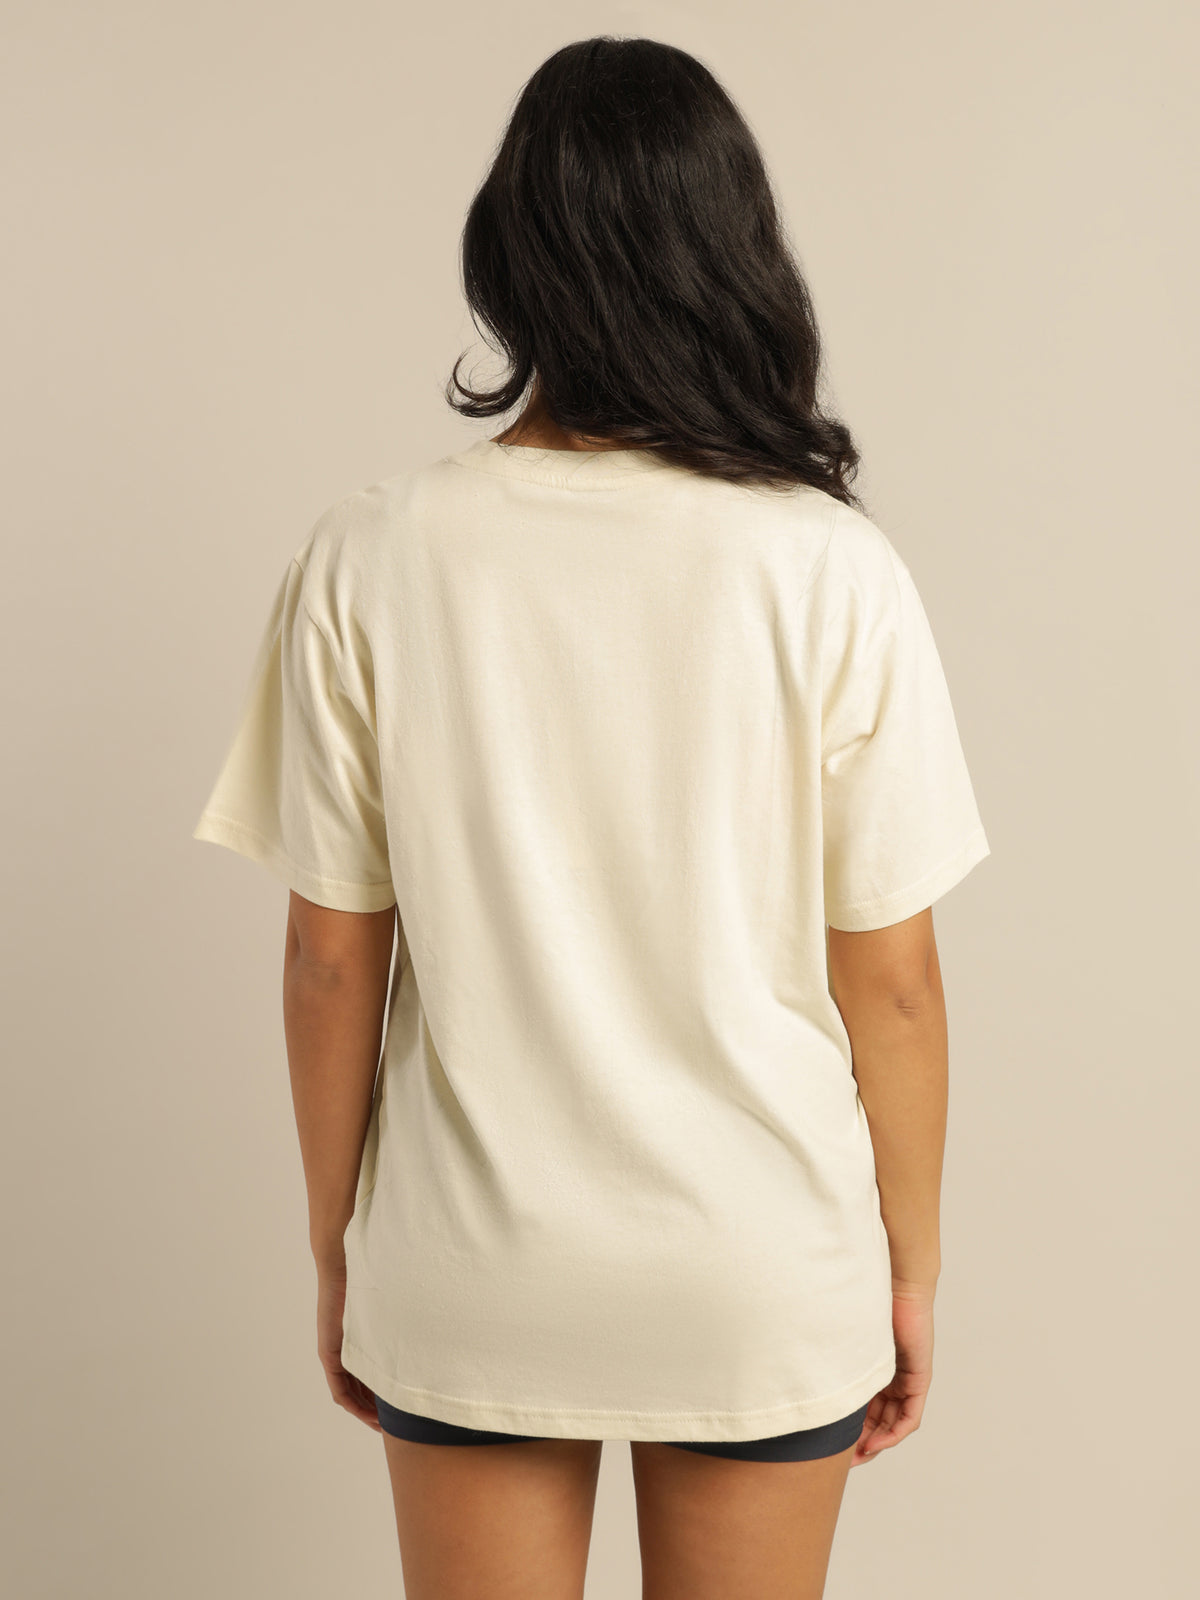 Layback Printed T-Shirt in Winter White